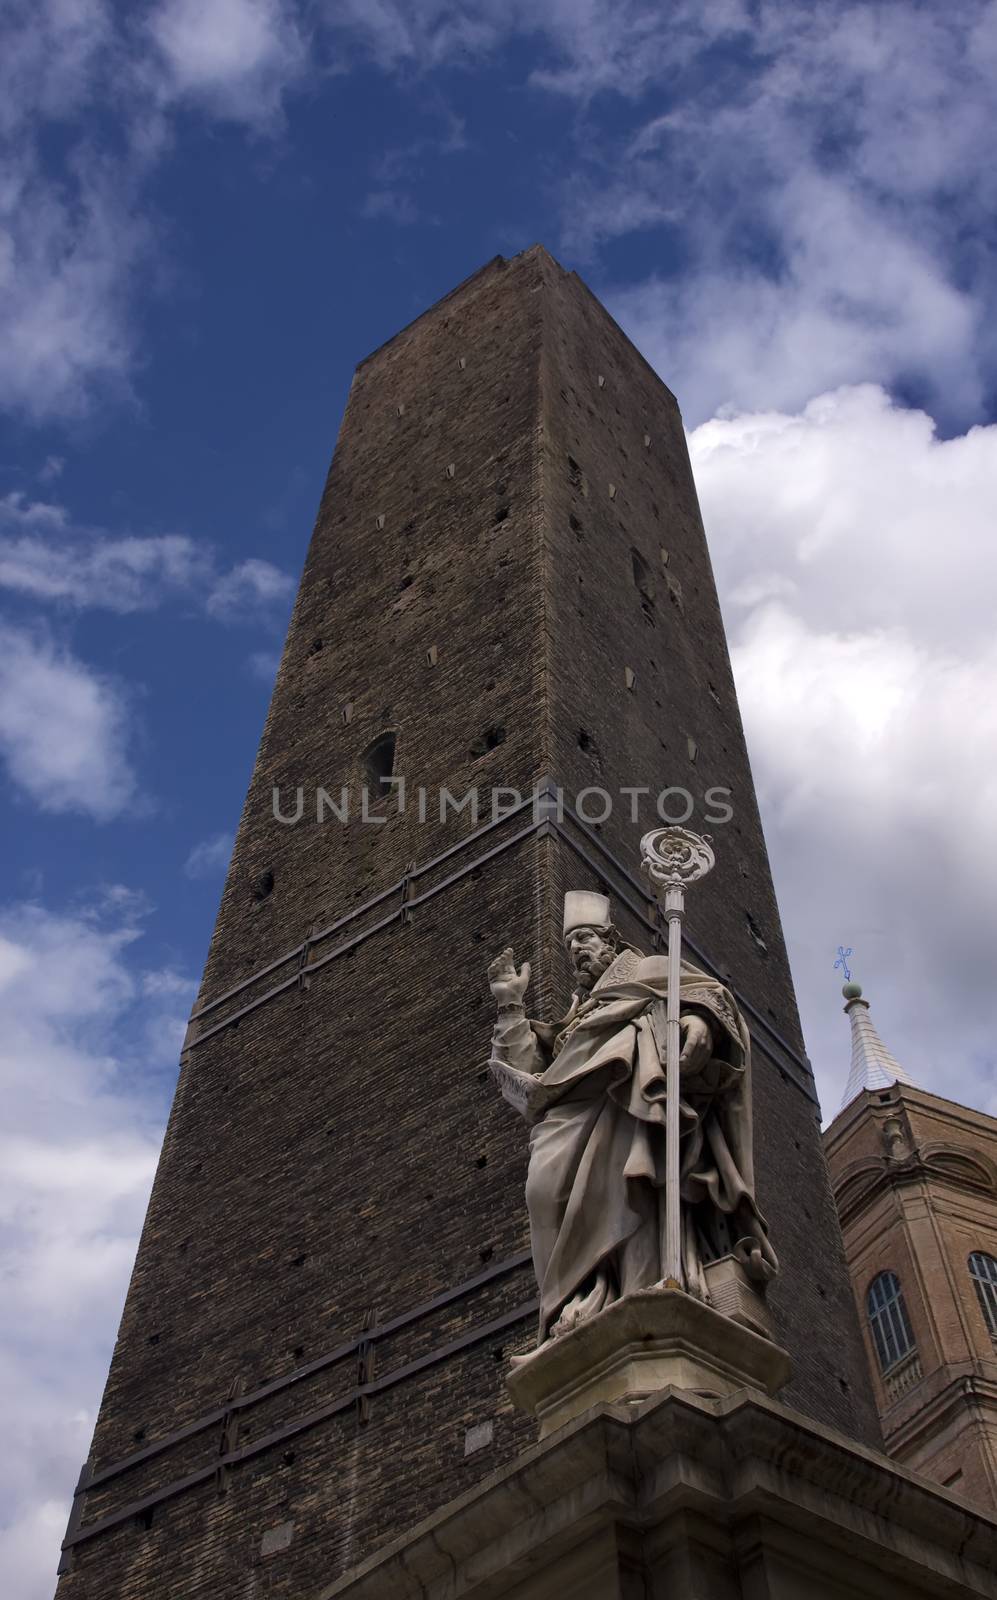 Asinelli Tower and Saint Petronius Statue in Bologna, Italy